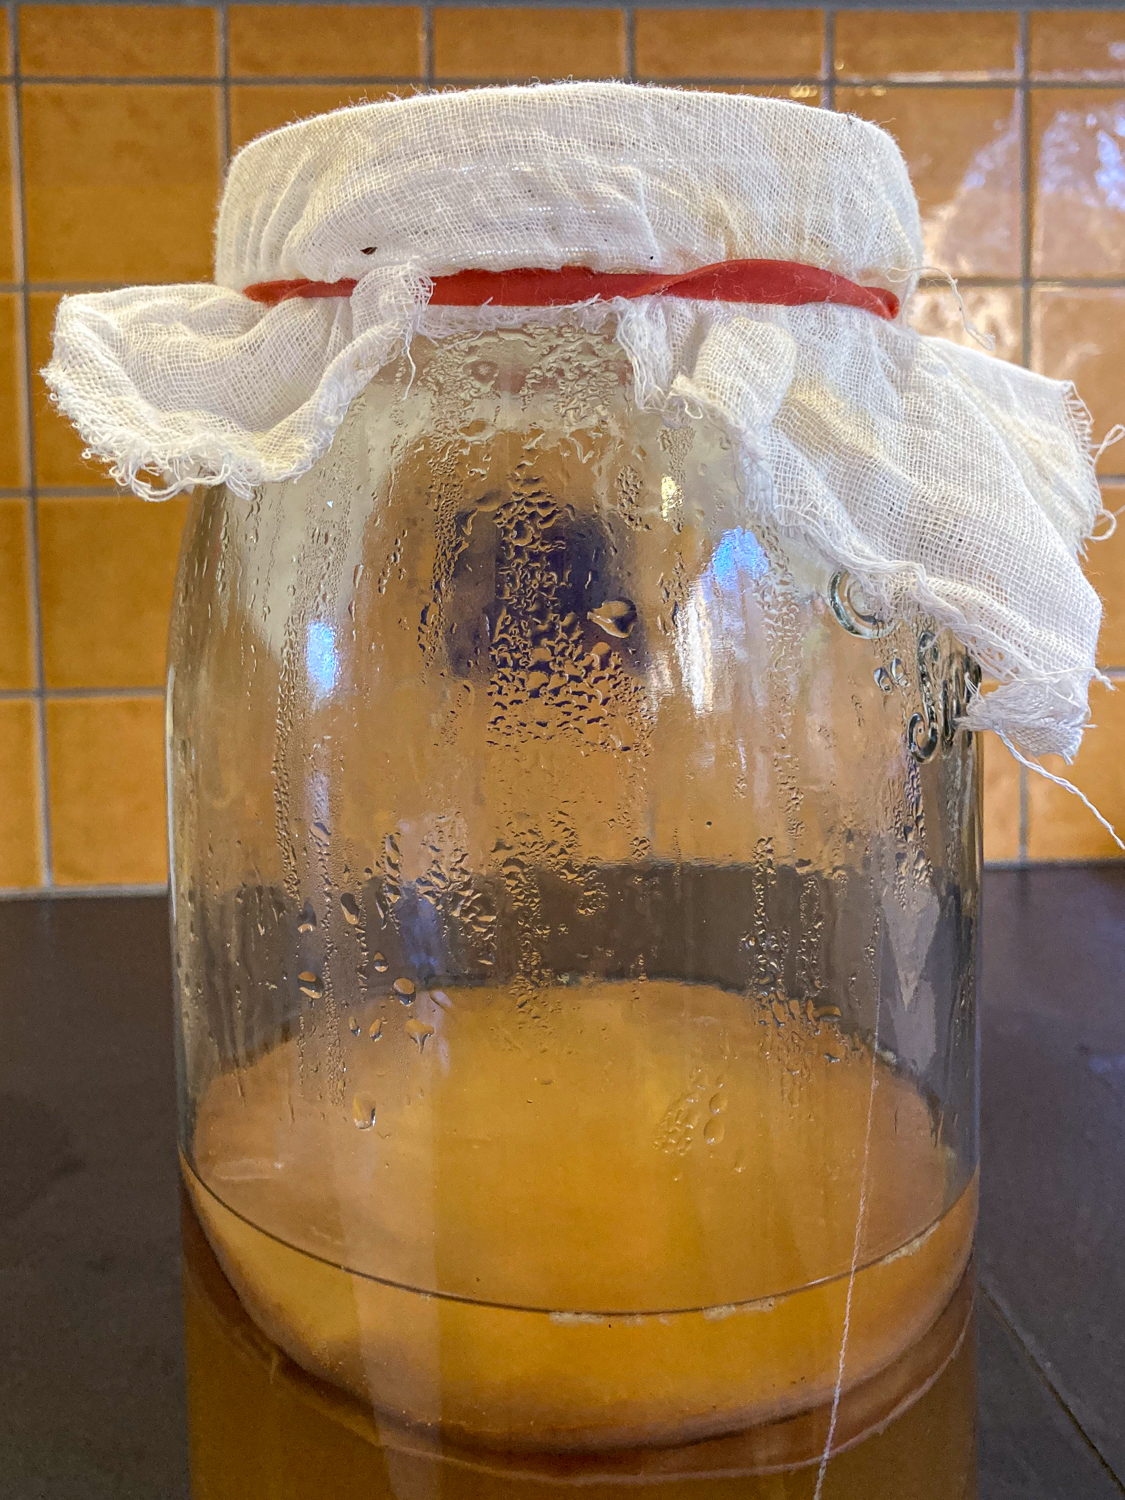 A large jar with yellow liquid covered with a muslin cloth